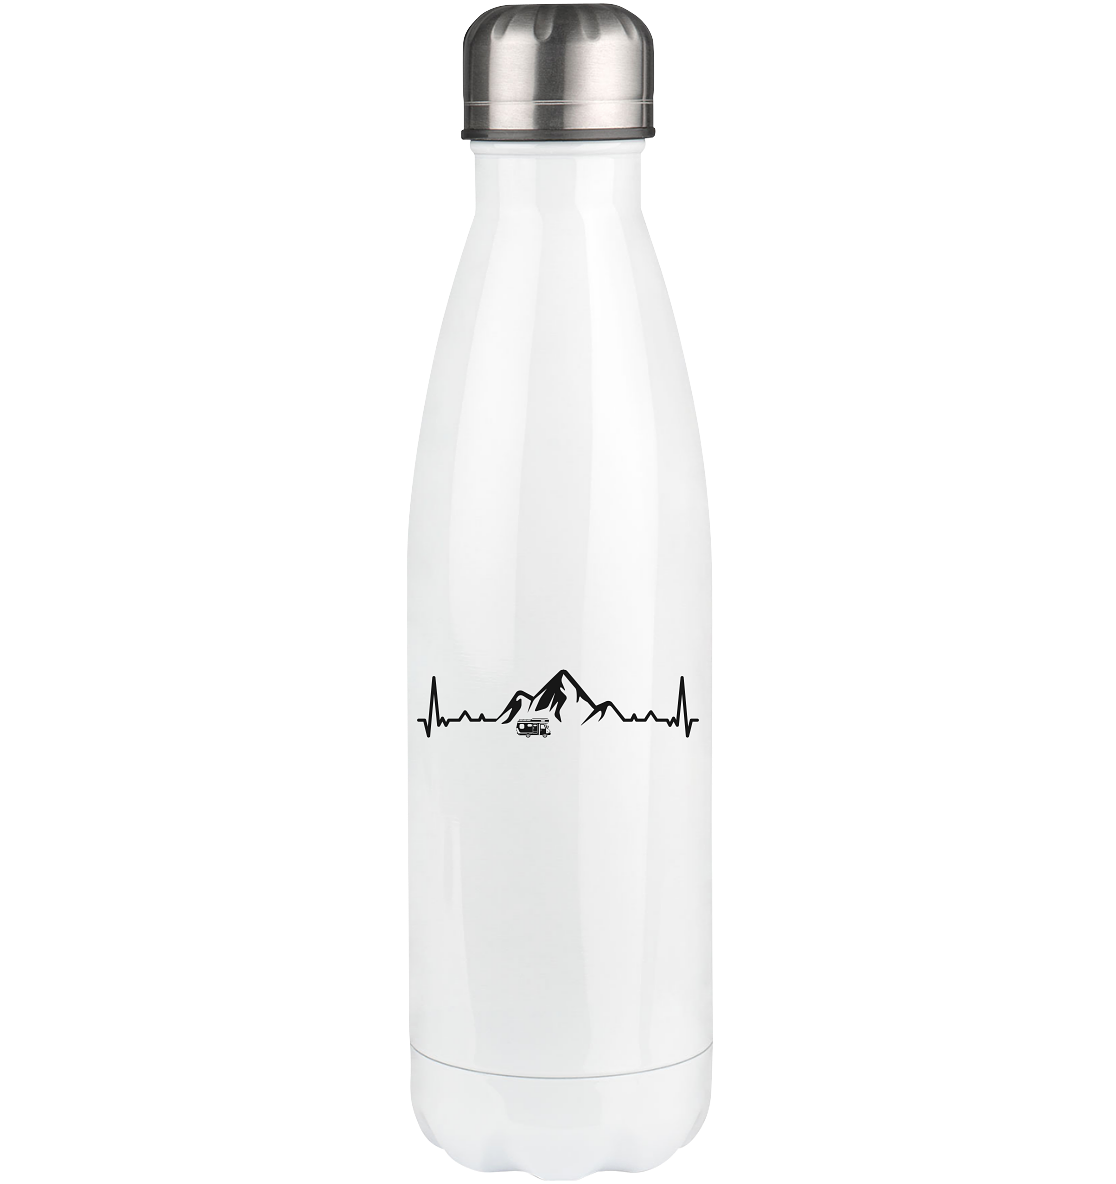 Heartbeat Mountain 1 and Camping - Edelstahl Thermosflasche camping 500ml